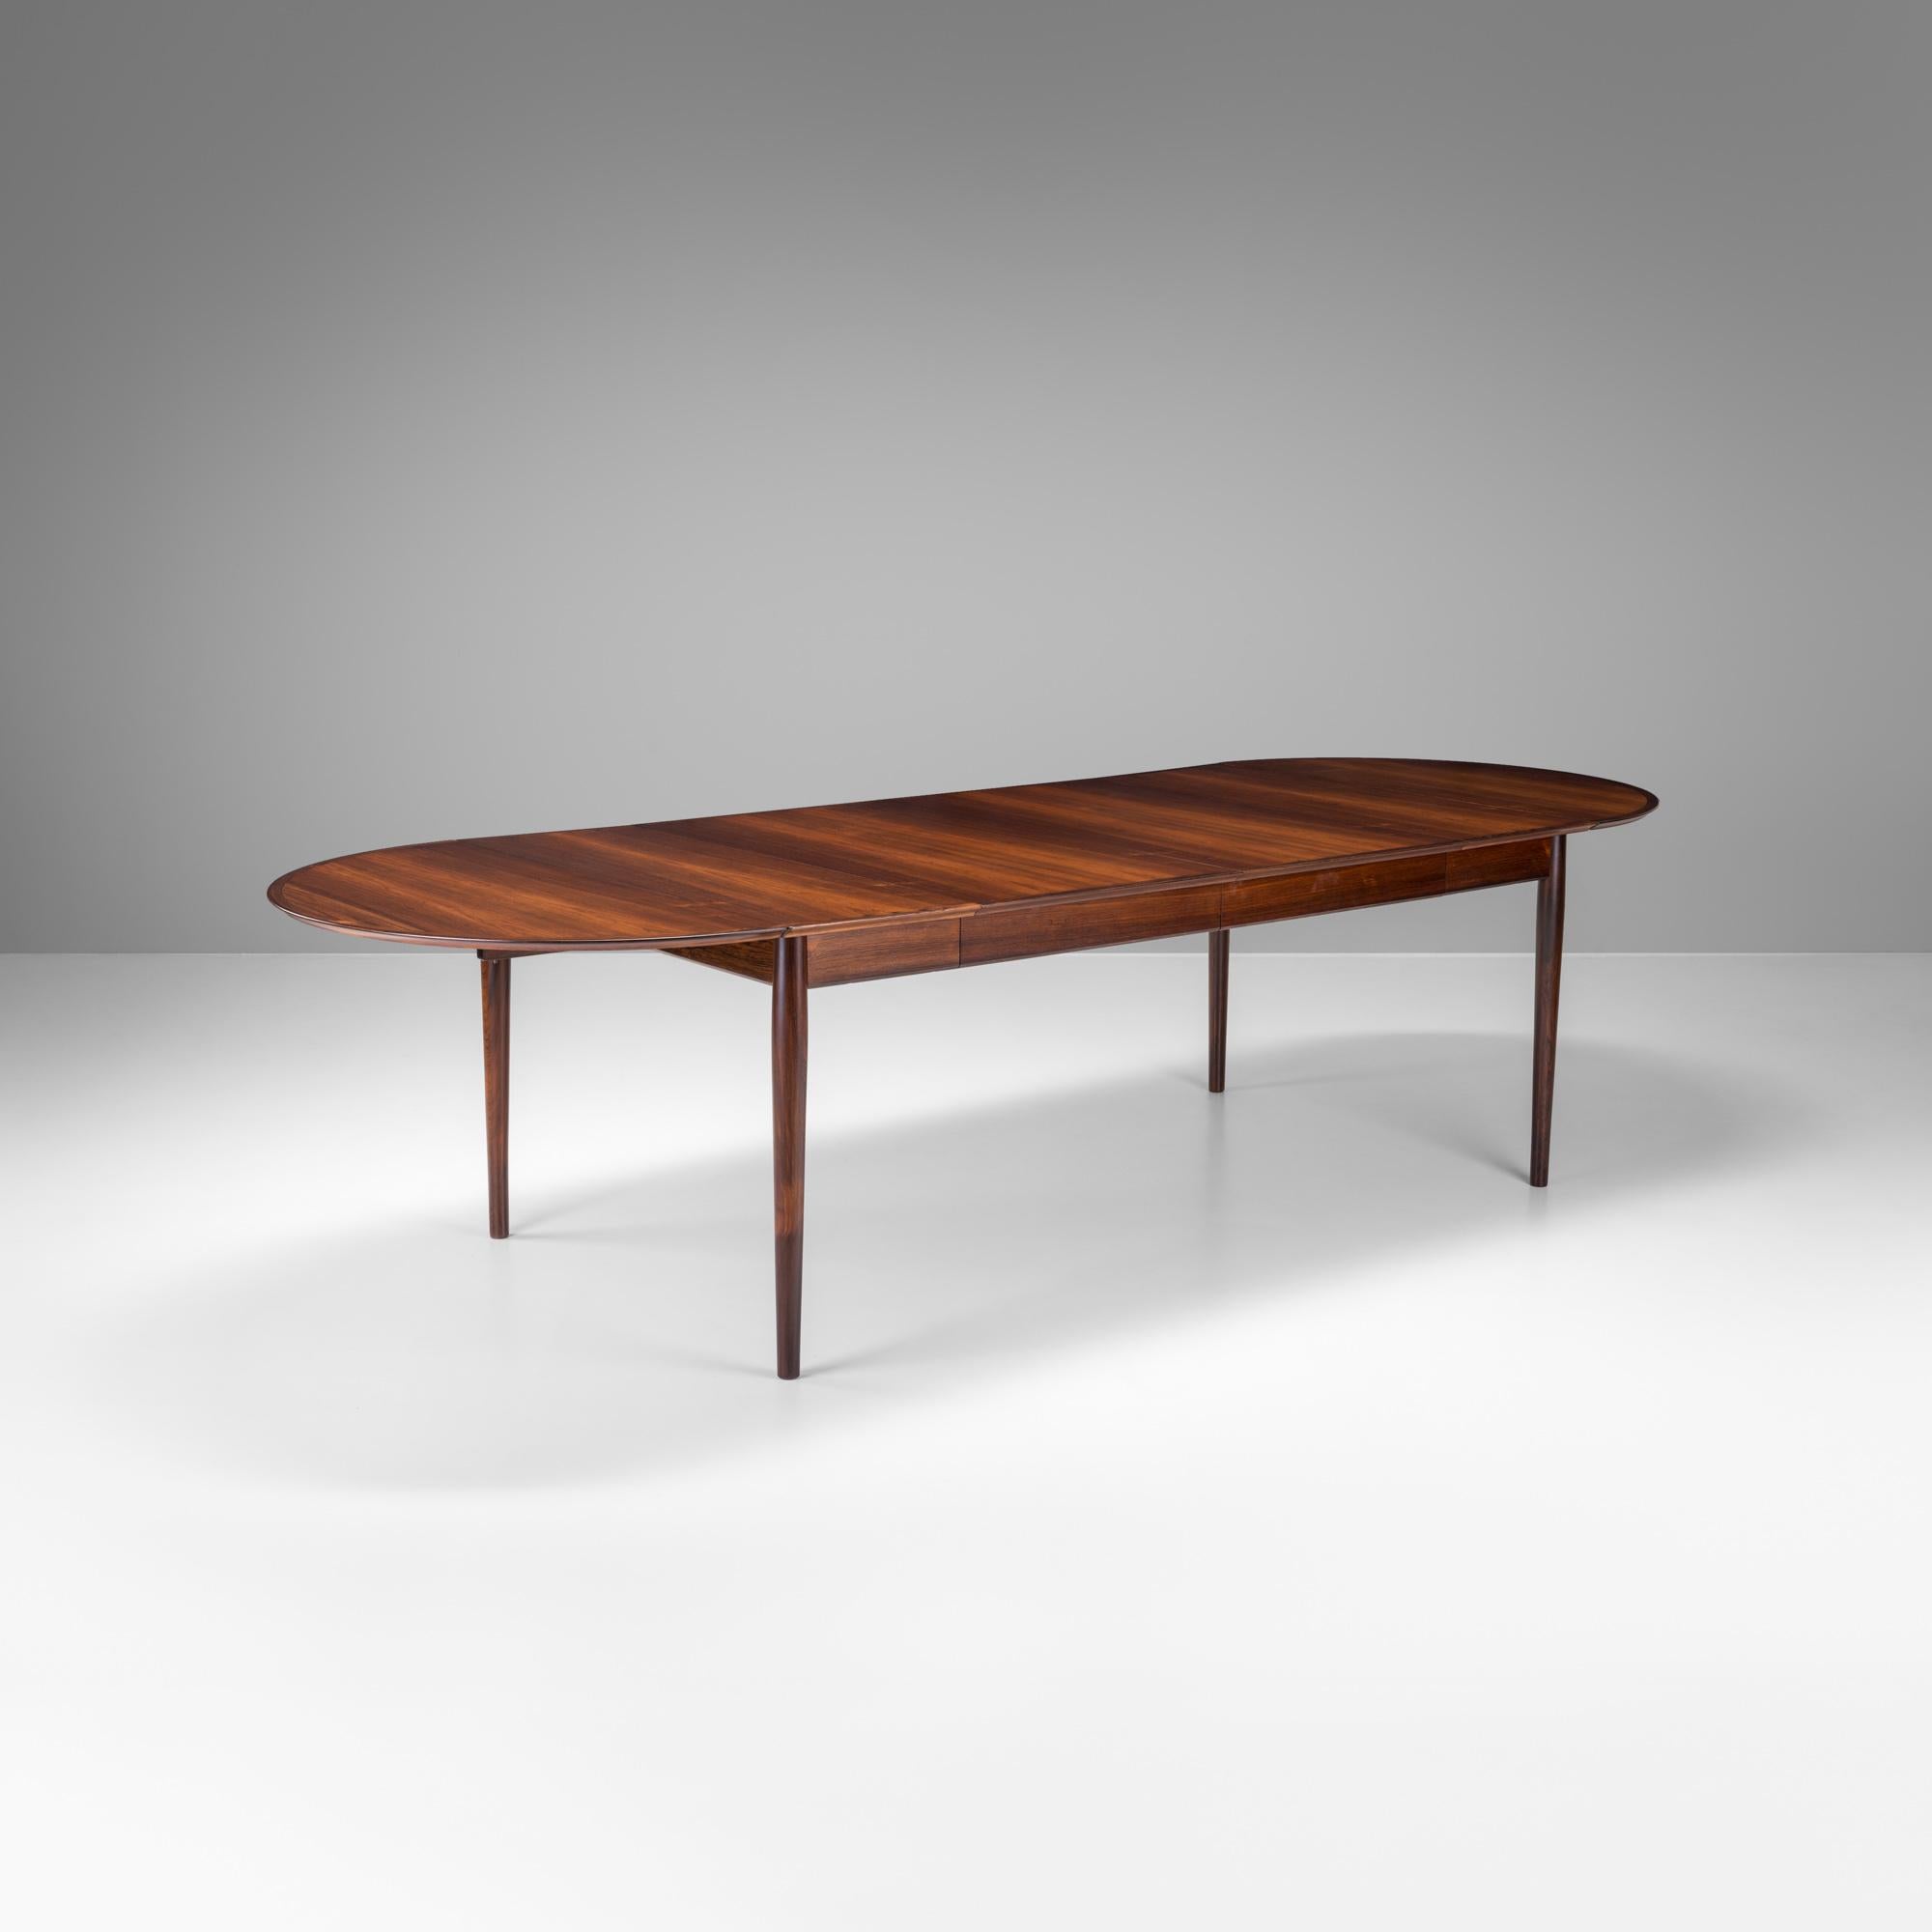 Mid-20th Century Arne Vodder Dining Table Model 227 Produced by Sibast in Denmark, c1950